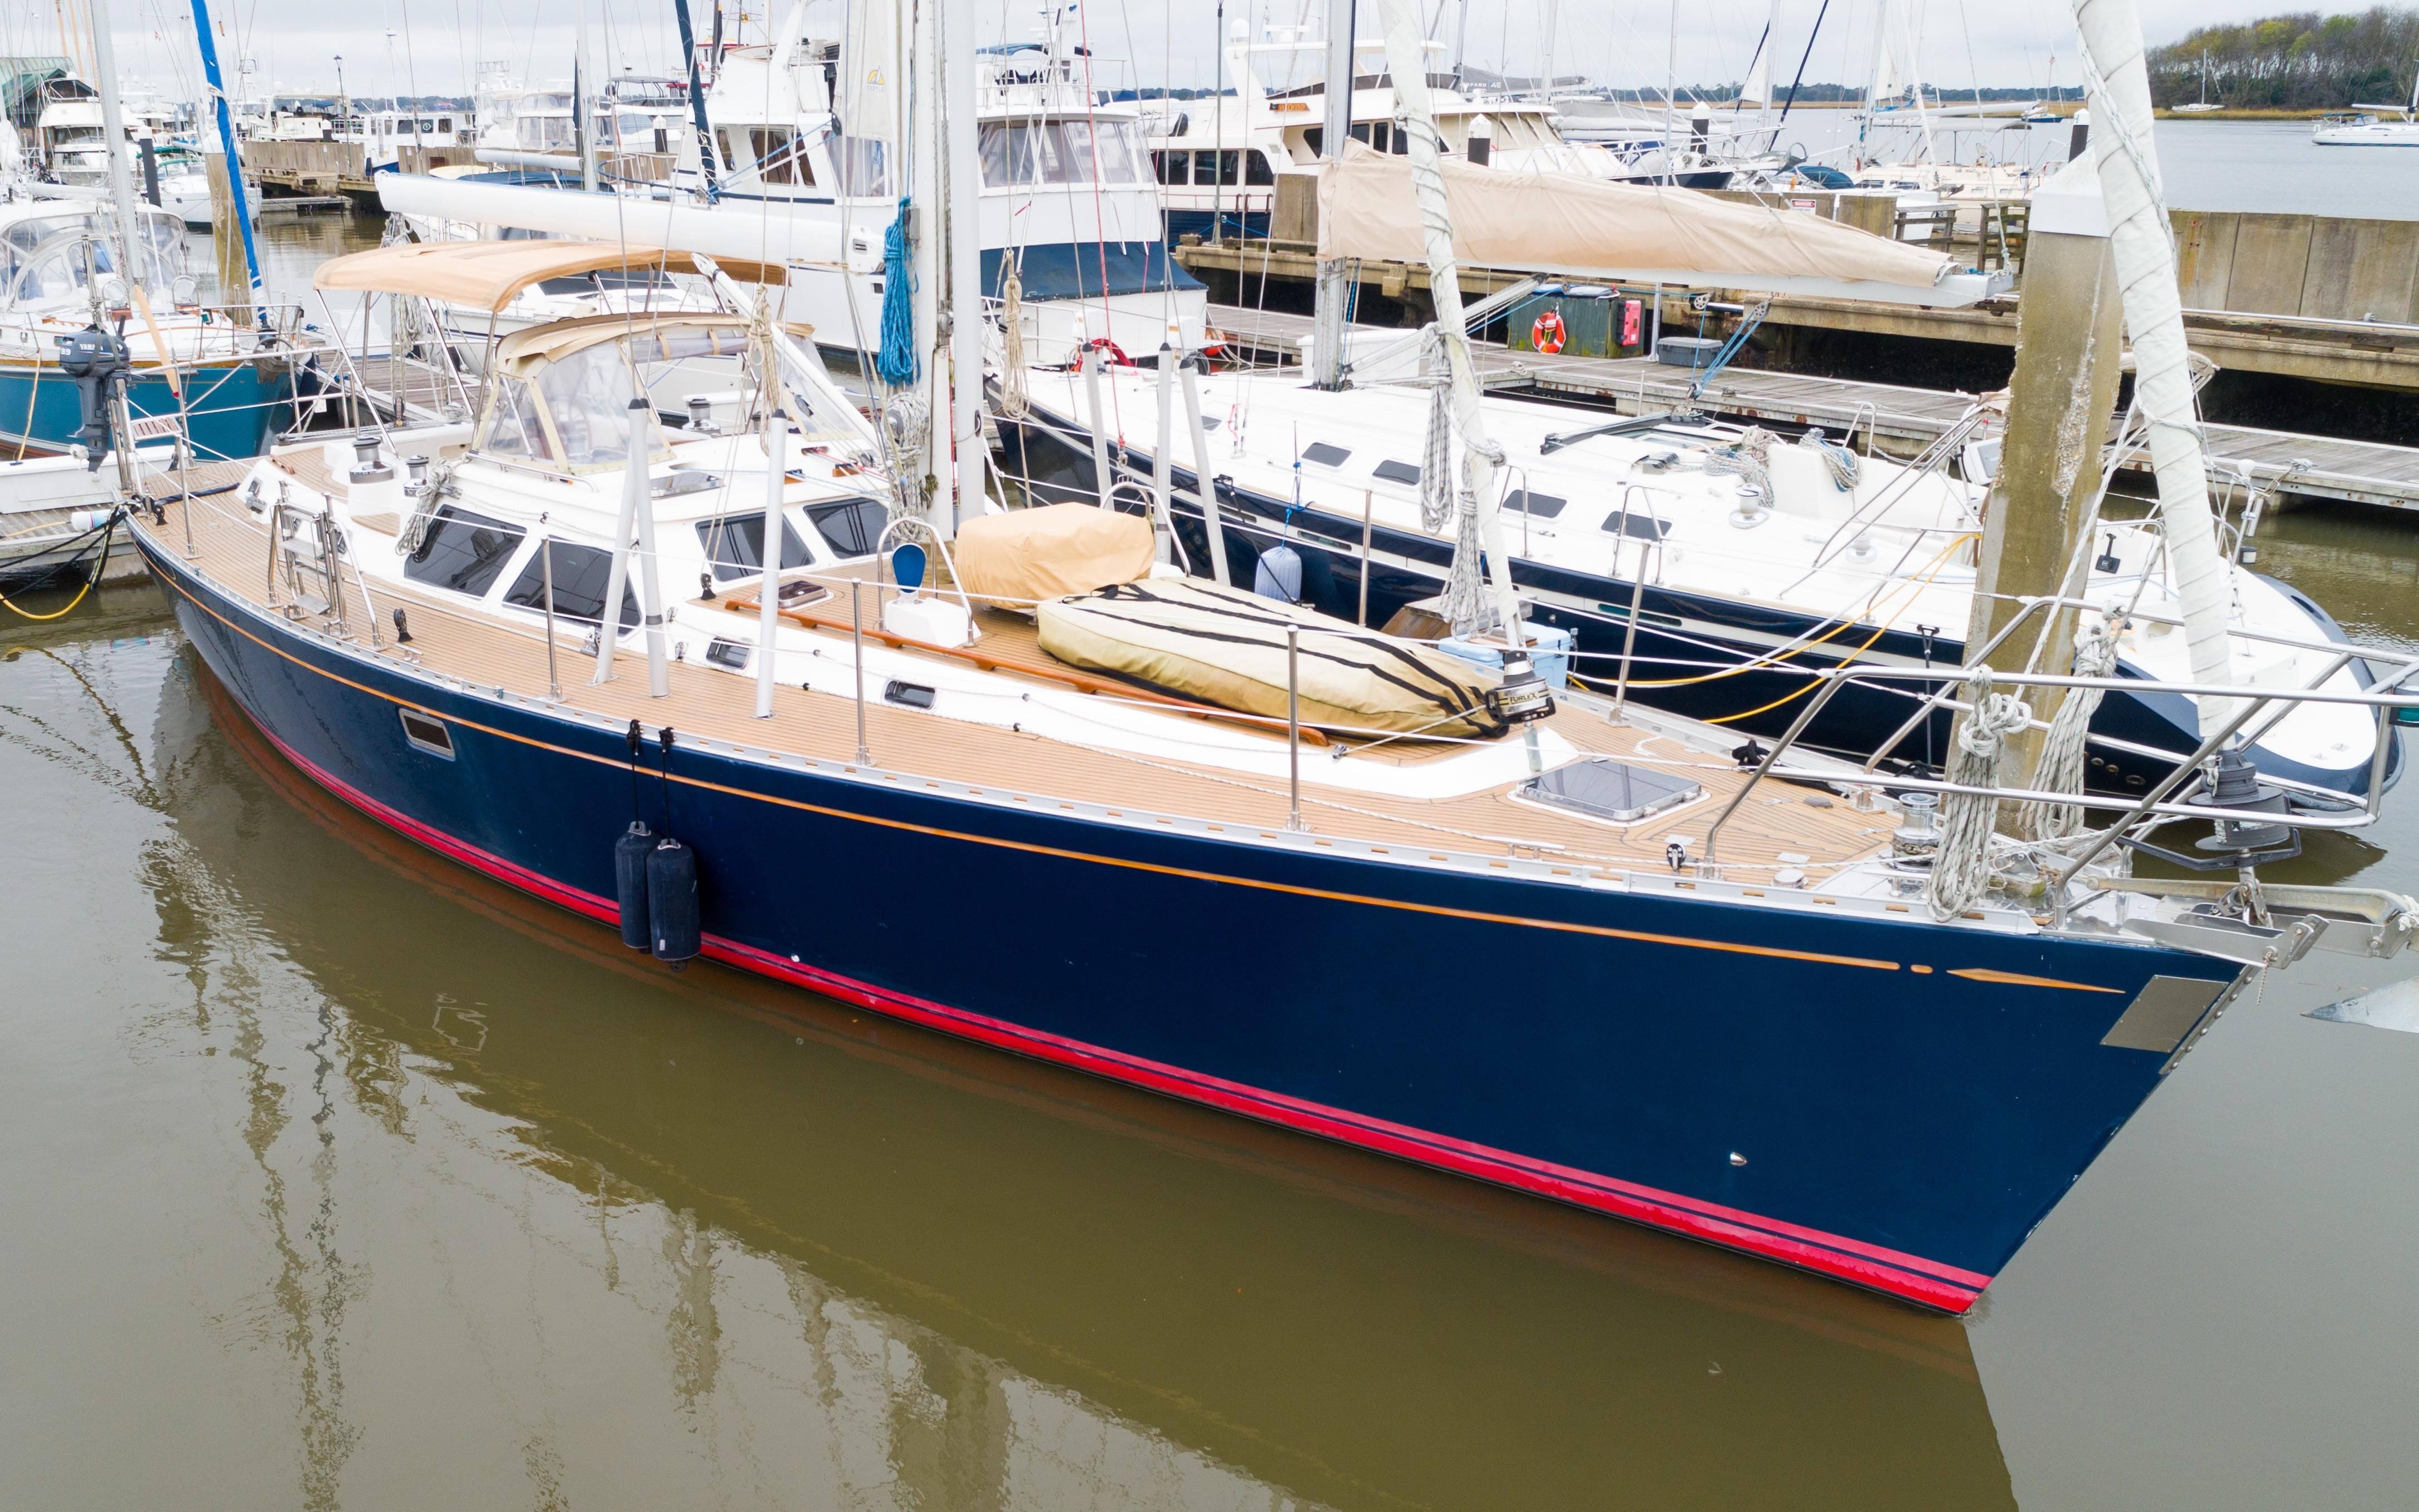 54 foot sailboat for sale